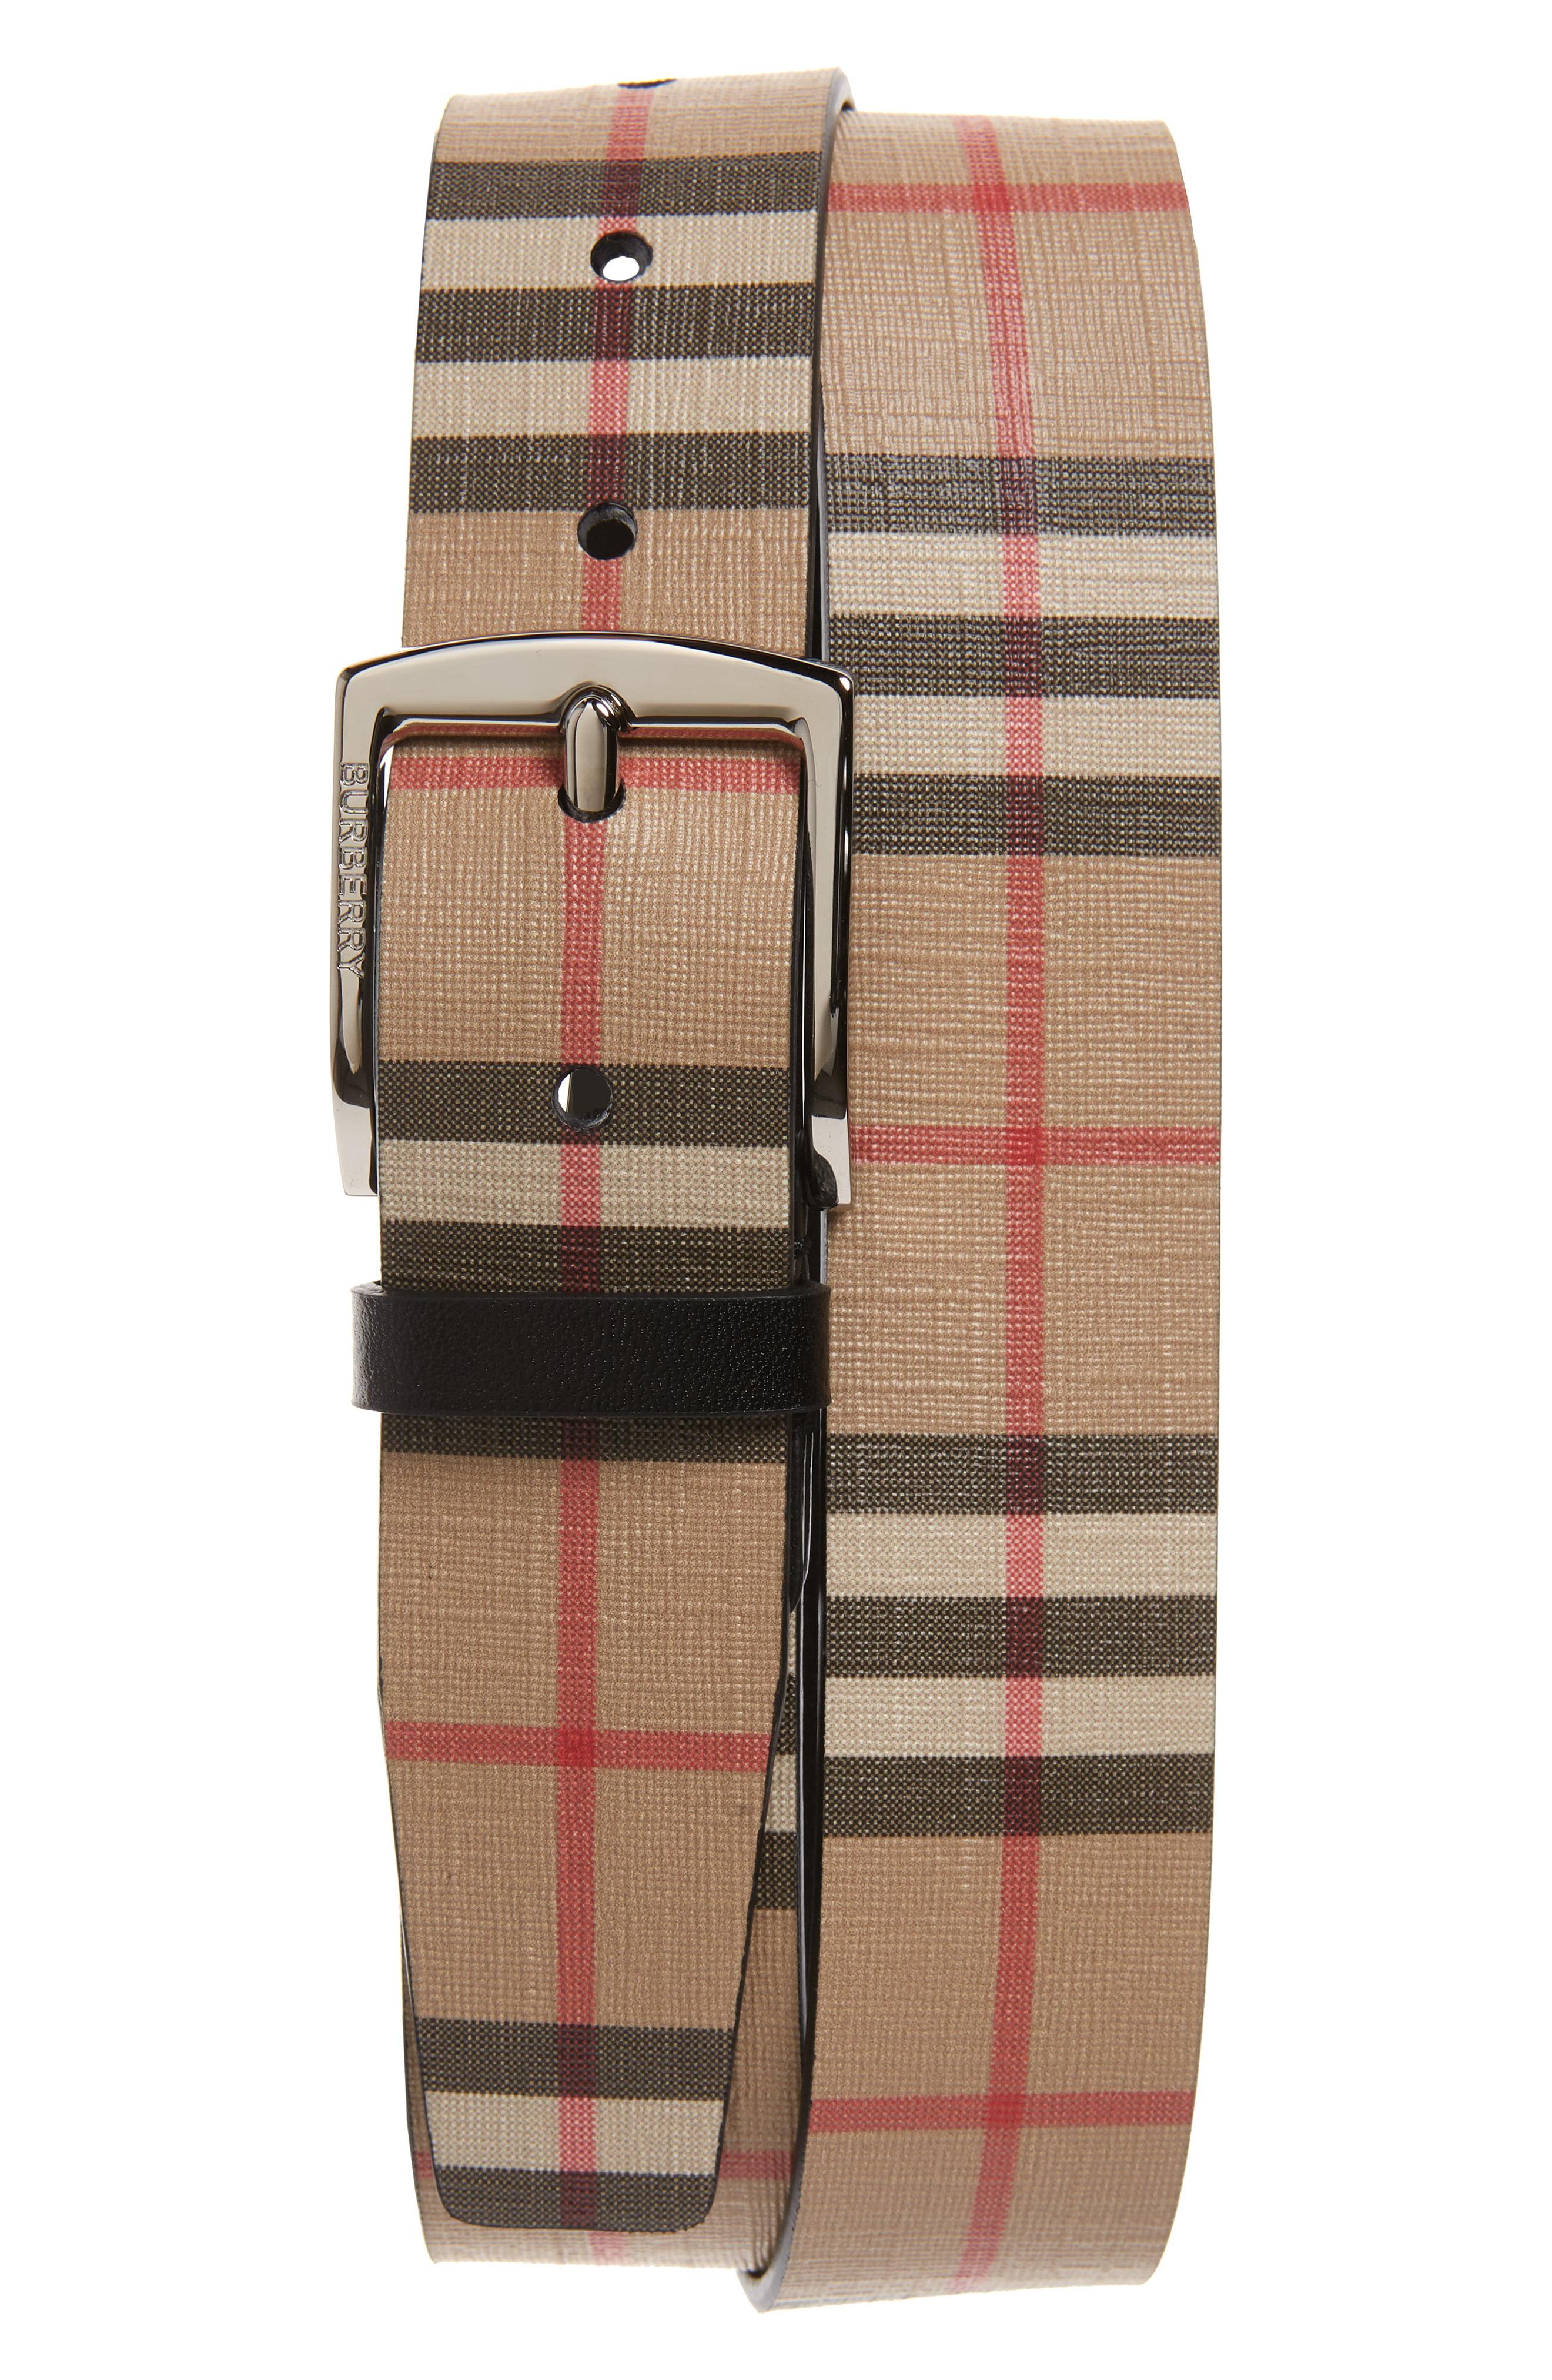 Burberry Check Belt in Natural for Men - Lyst